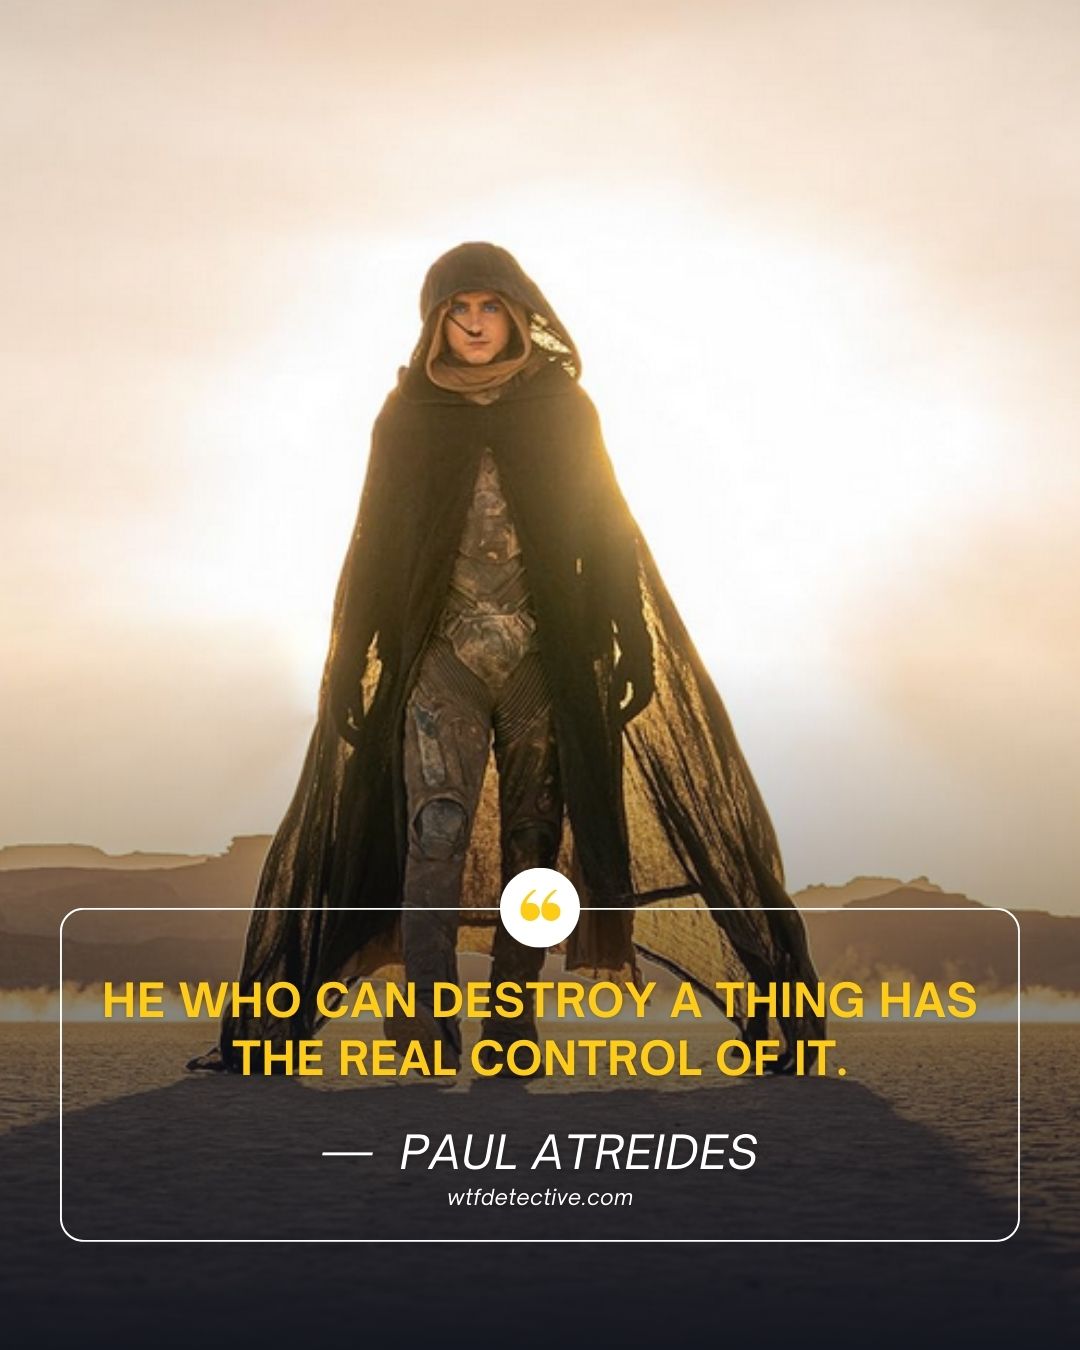 He who can destroy quotes,  the real control quotes, paul atreides sayings, dune part 2 quotes by timothee chalamet